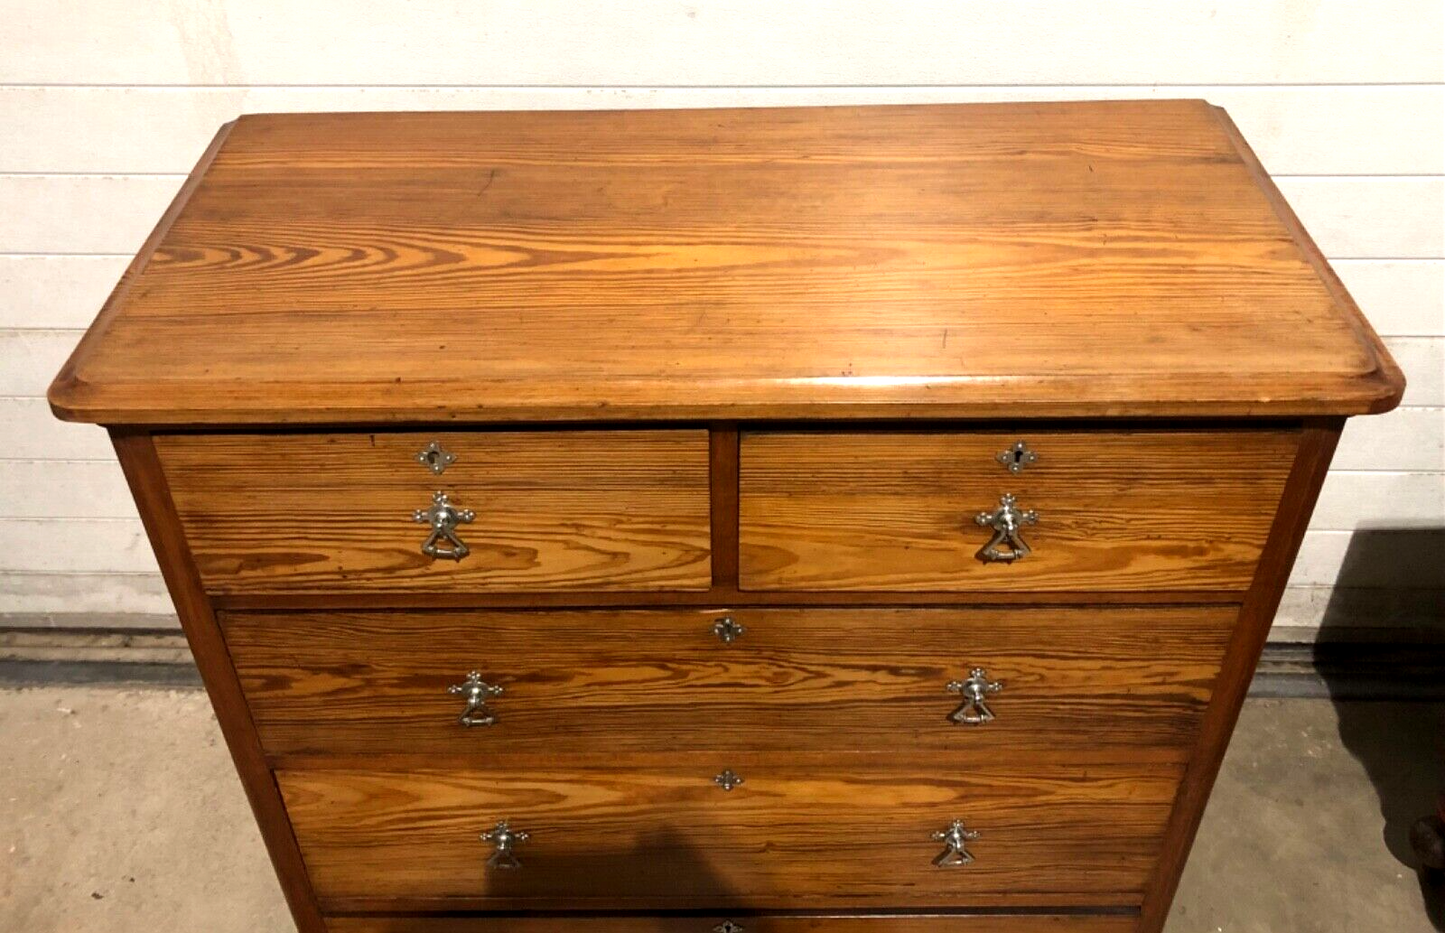 000772....Handsome Antique Pine Chest Of Drawers ( sold )